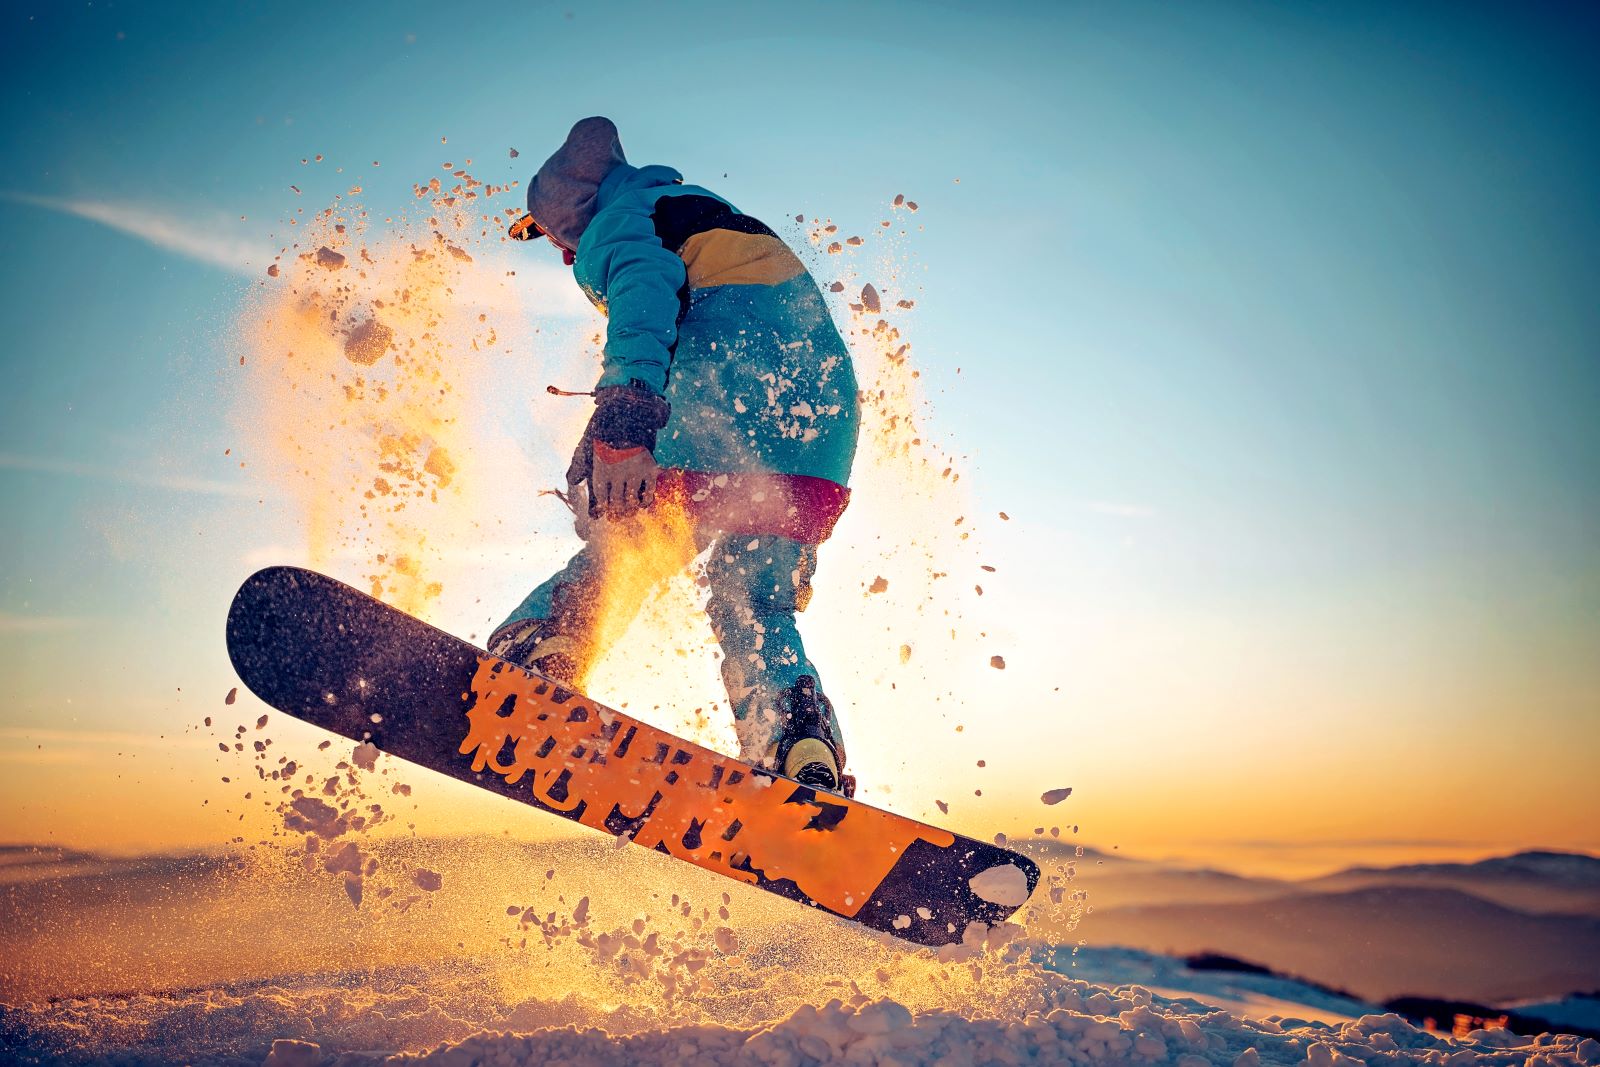 4 Ideas for Avoiding Snowboarding and Snowboarding Accidents |  Hartford HealthCare